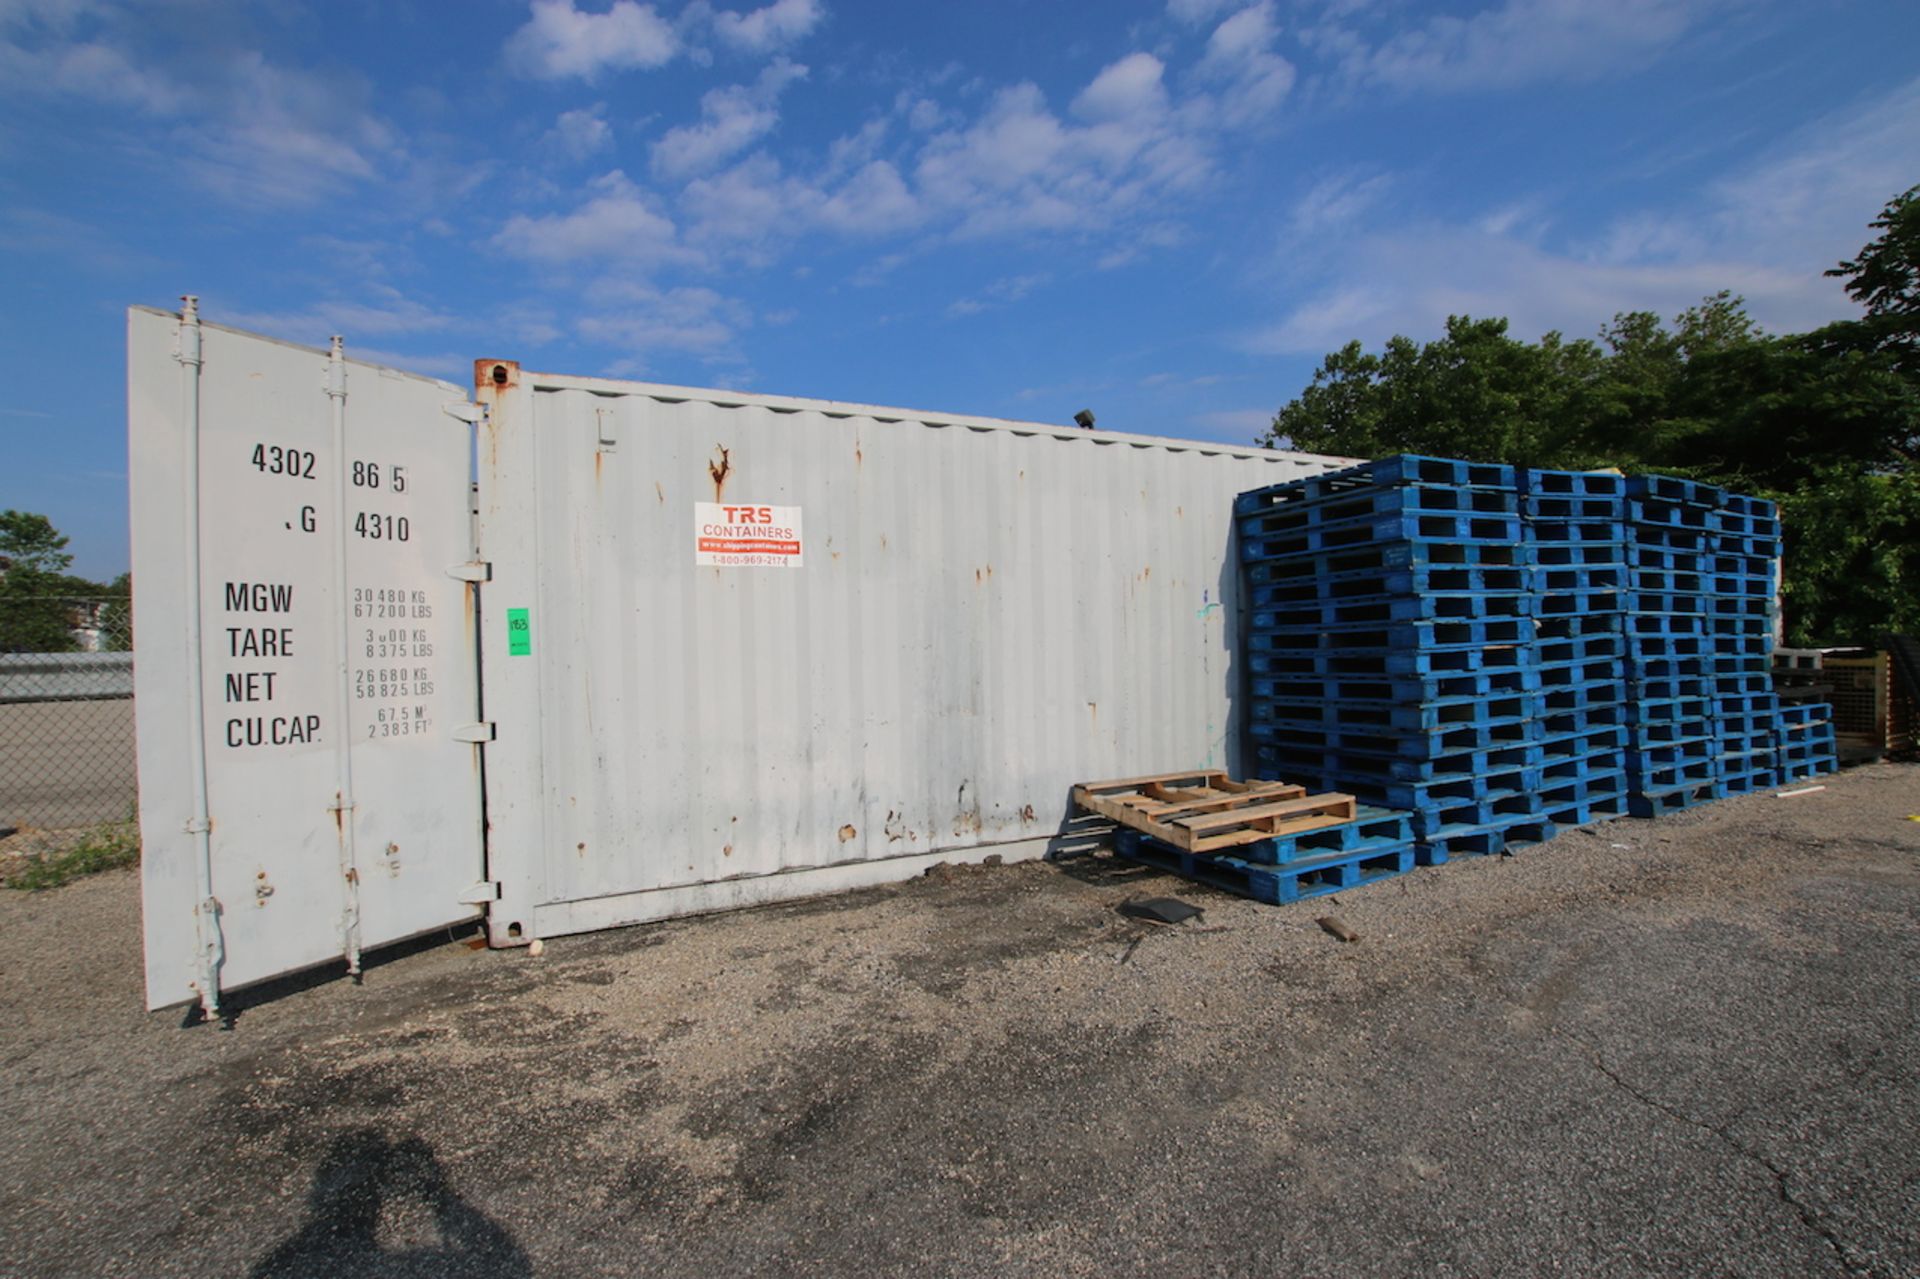 International Cargo Shipping Container, Dims.: 38'5" L x 8' W x 7'10" H